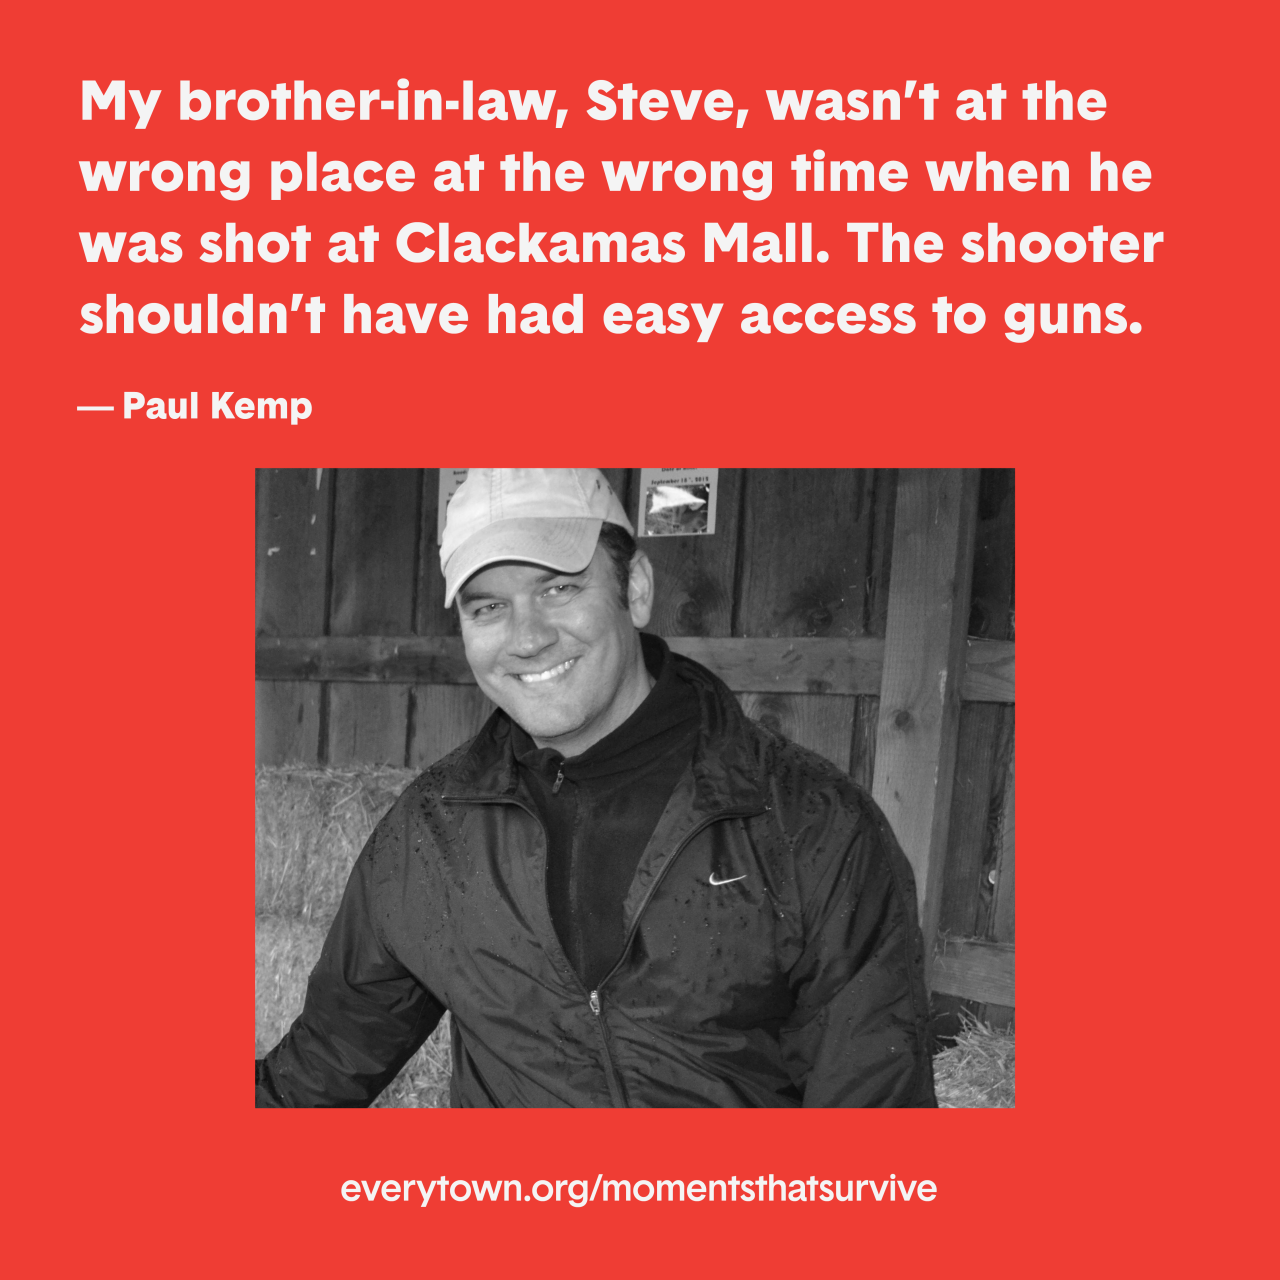 Seven years ago today, Paul Kemp got word from his sister that there had been a shooting at the Clackamas Town Center Mall in Oregon.
Hours later, they found out that his sister’s husband, Steve, had been shot and killed. Read Paul’s...